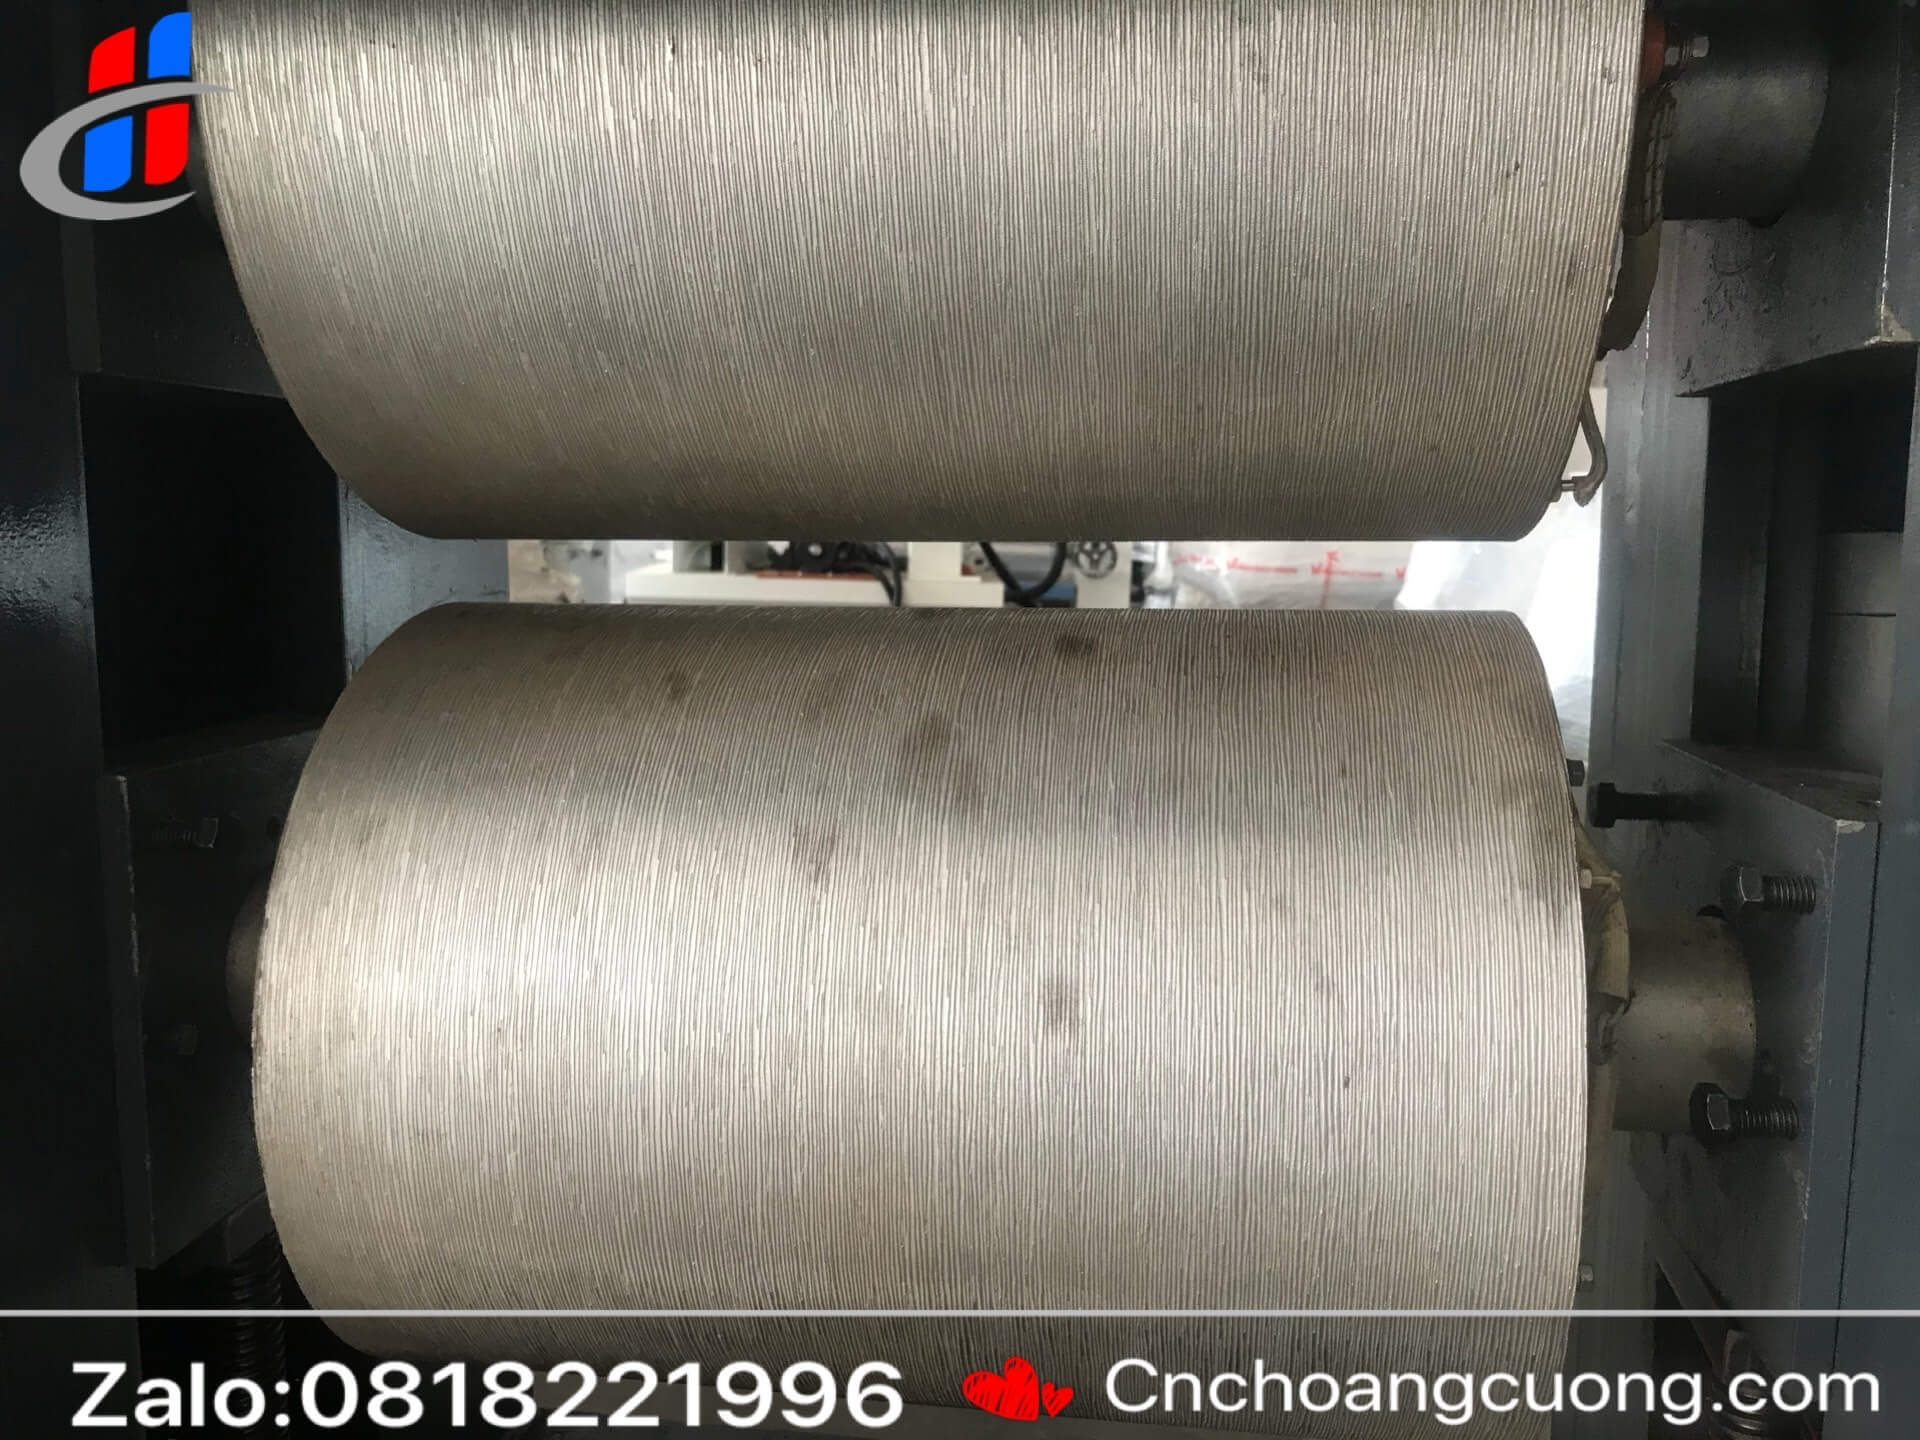 https://cnchoangcuong.com/?post_type=product&p=3000&preview=true